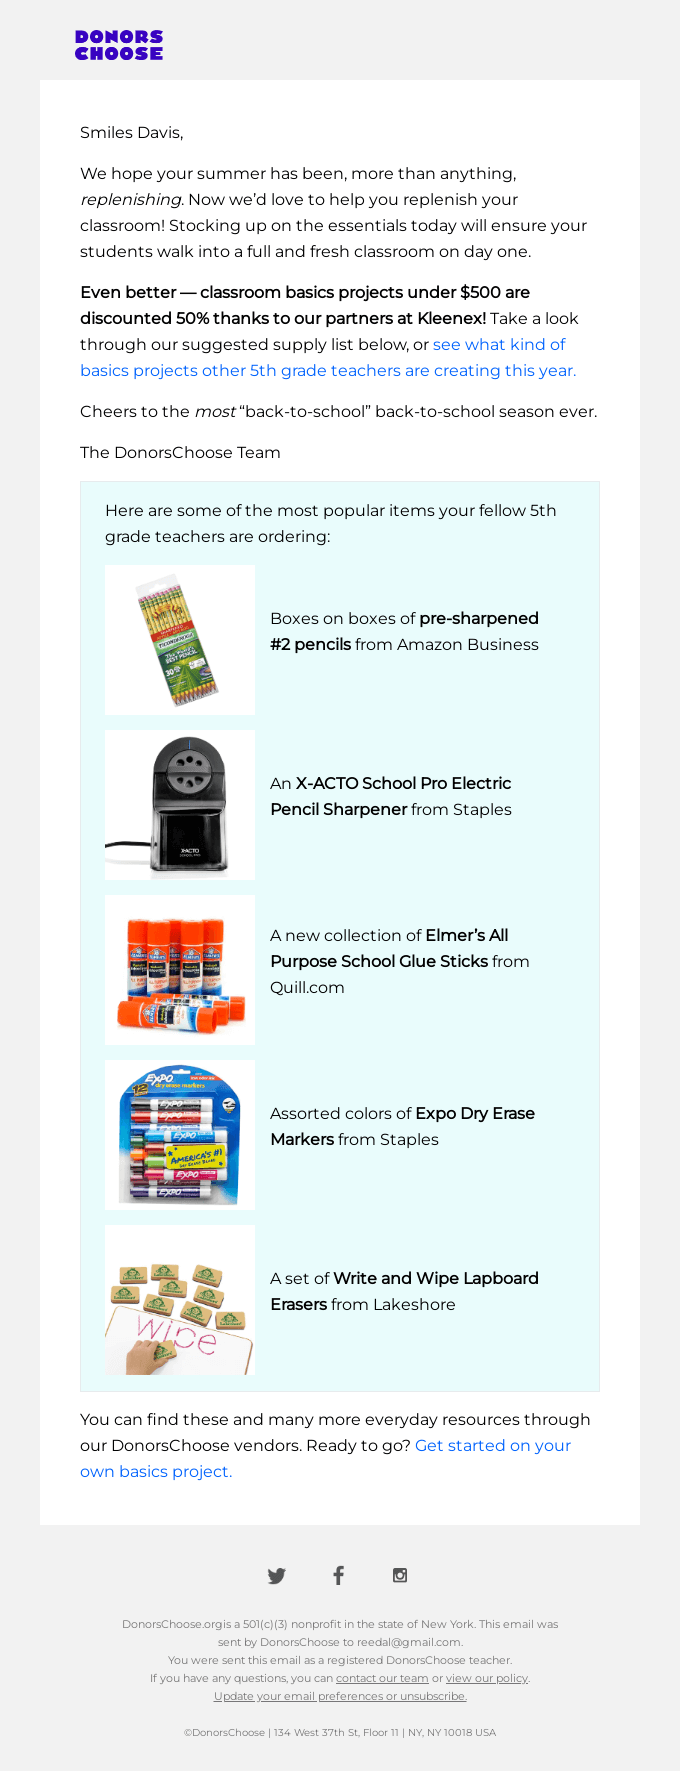 A match offer to restock your classroom essentials!